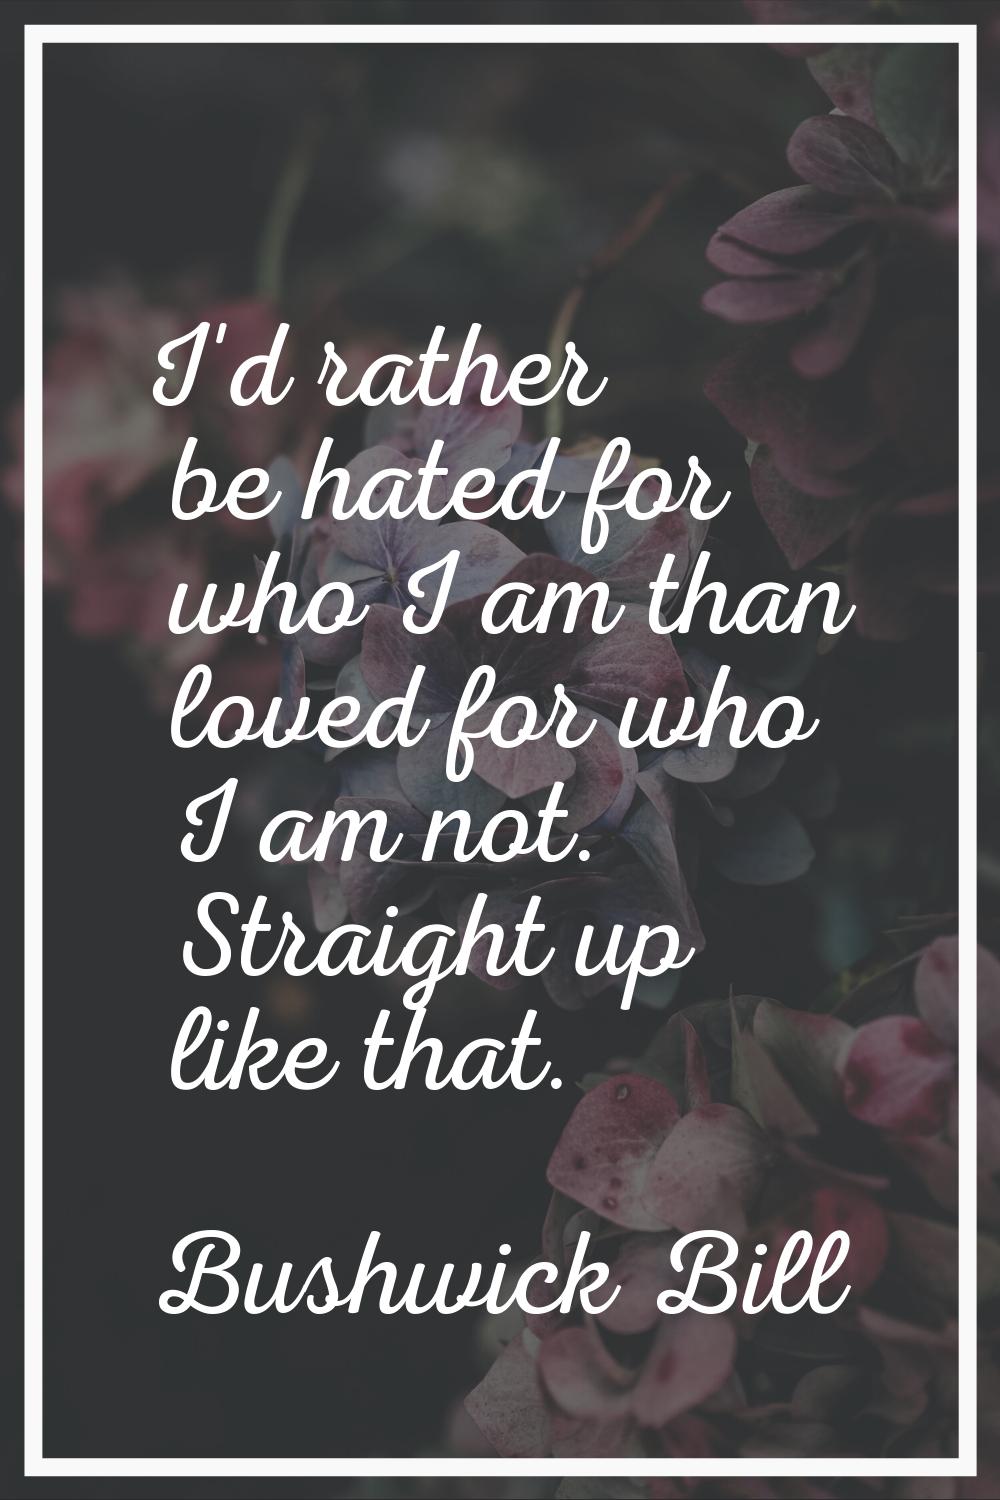 I'd rather be hated for who I am than loved for who I am not. Straight up like that.